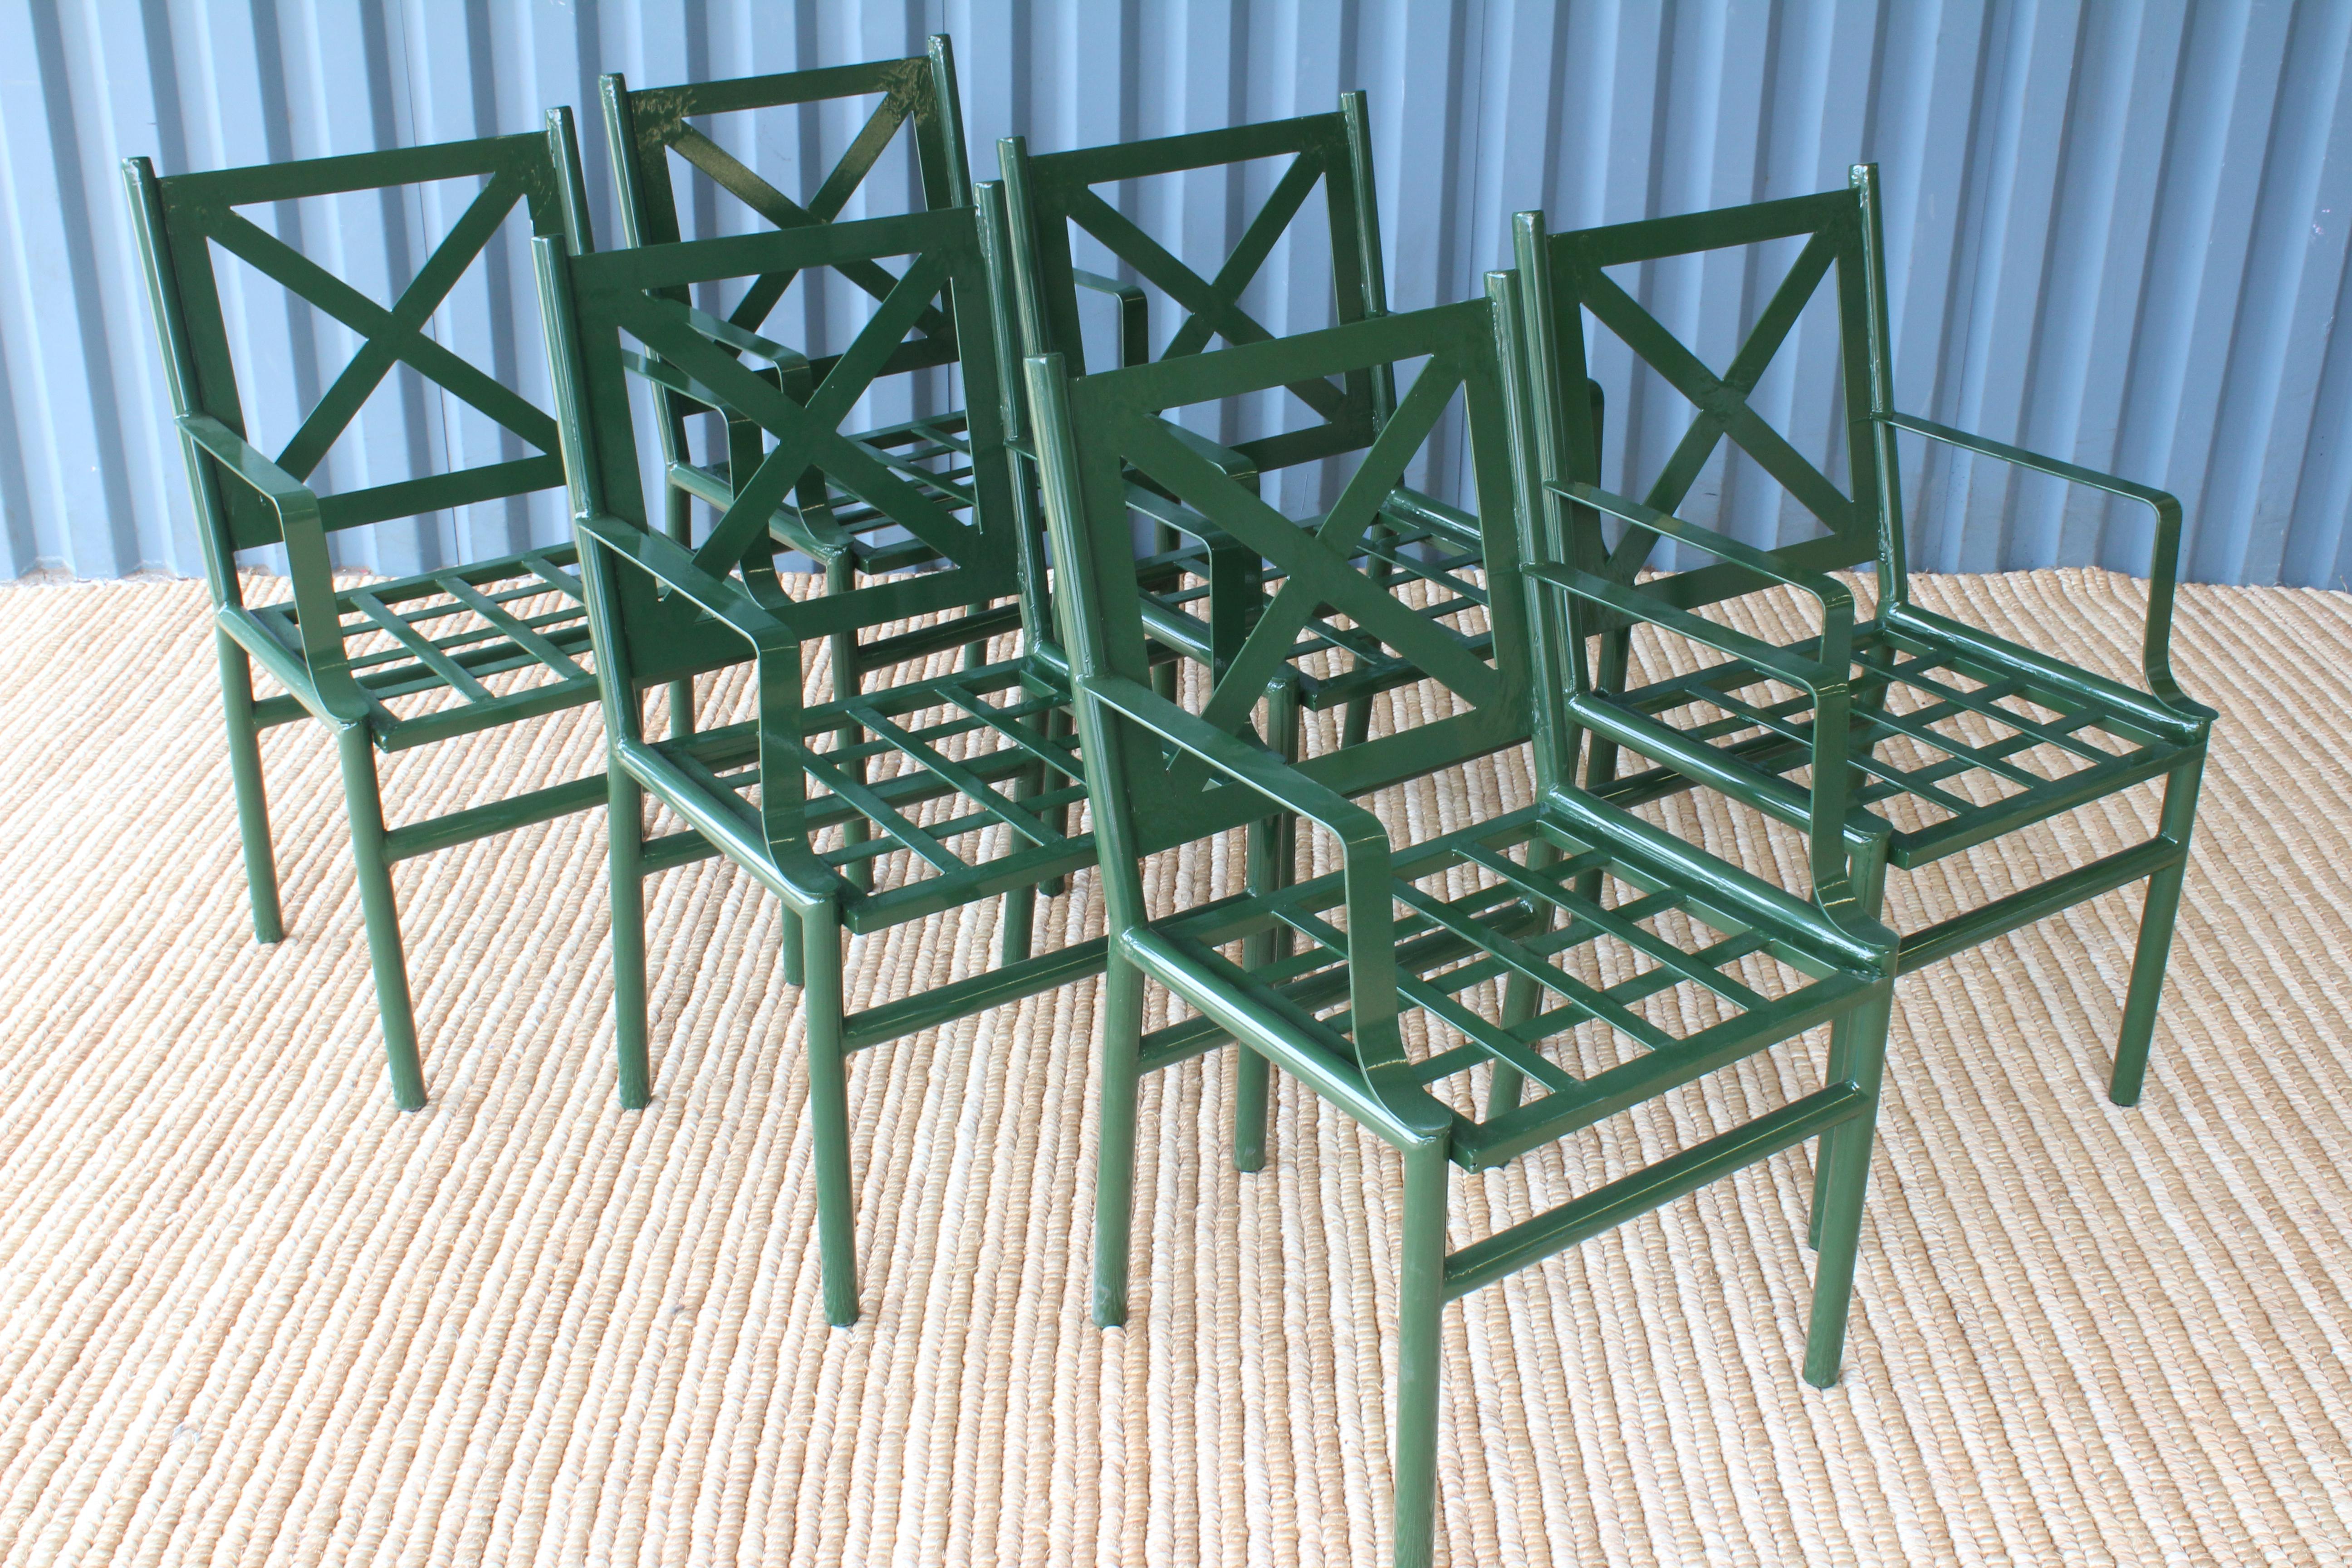 Set of 4 outdoor patio chairs, each sold individually. New green powder coating.